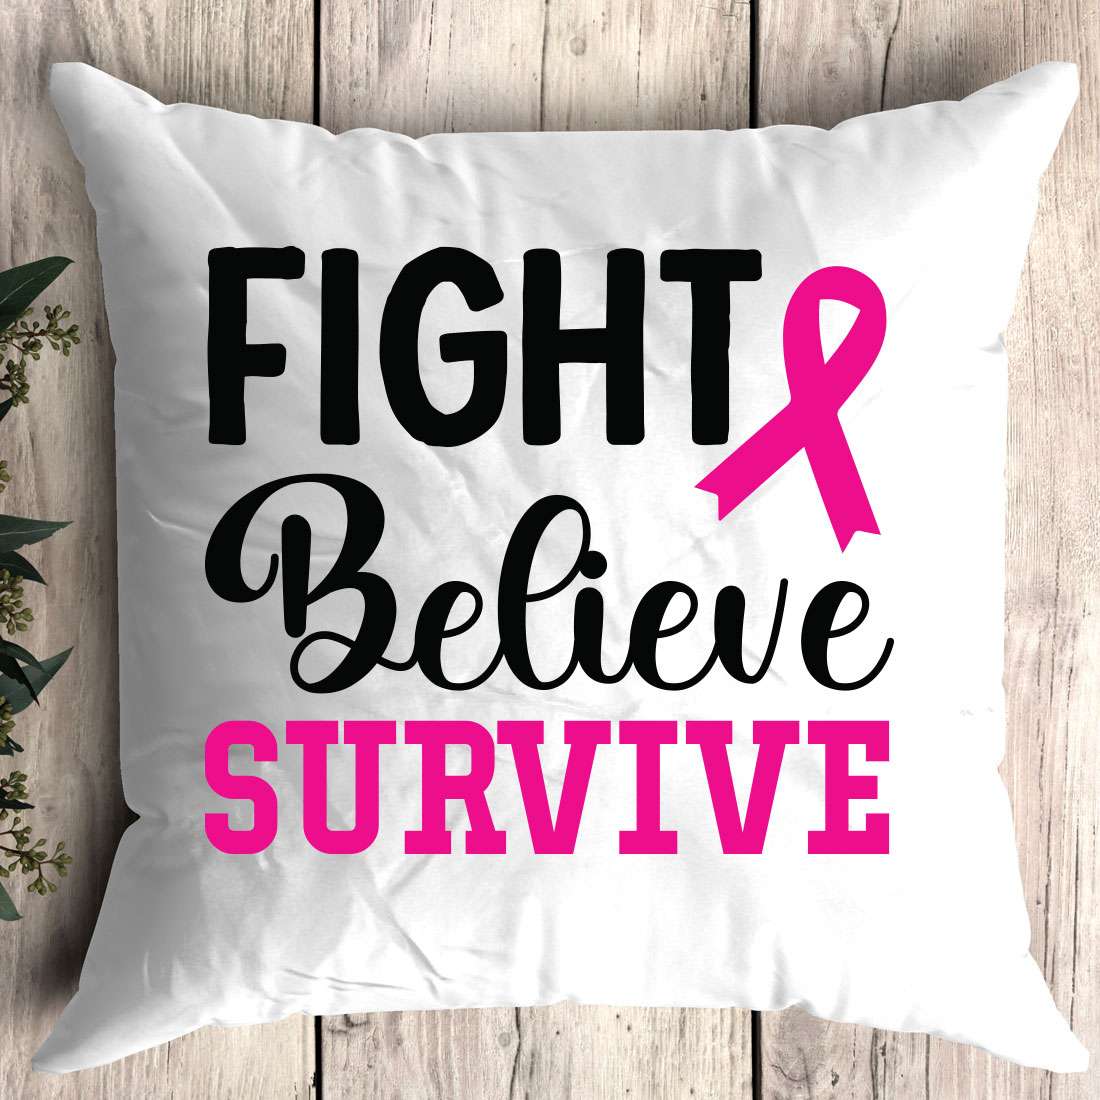 Pillow that says fight believe survive.